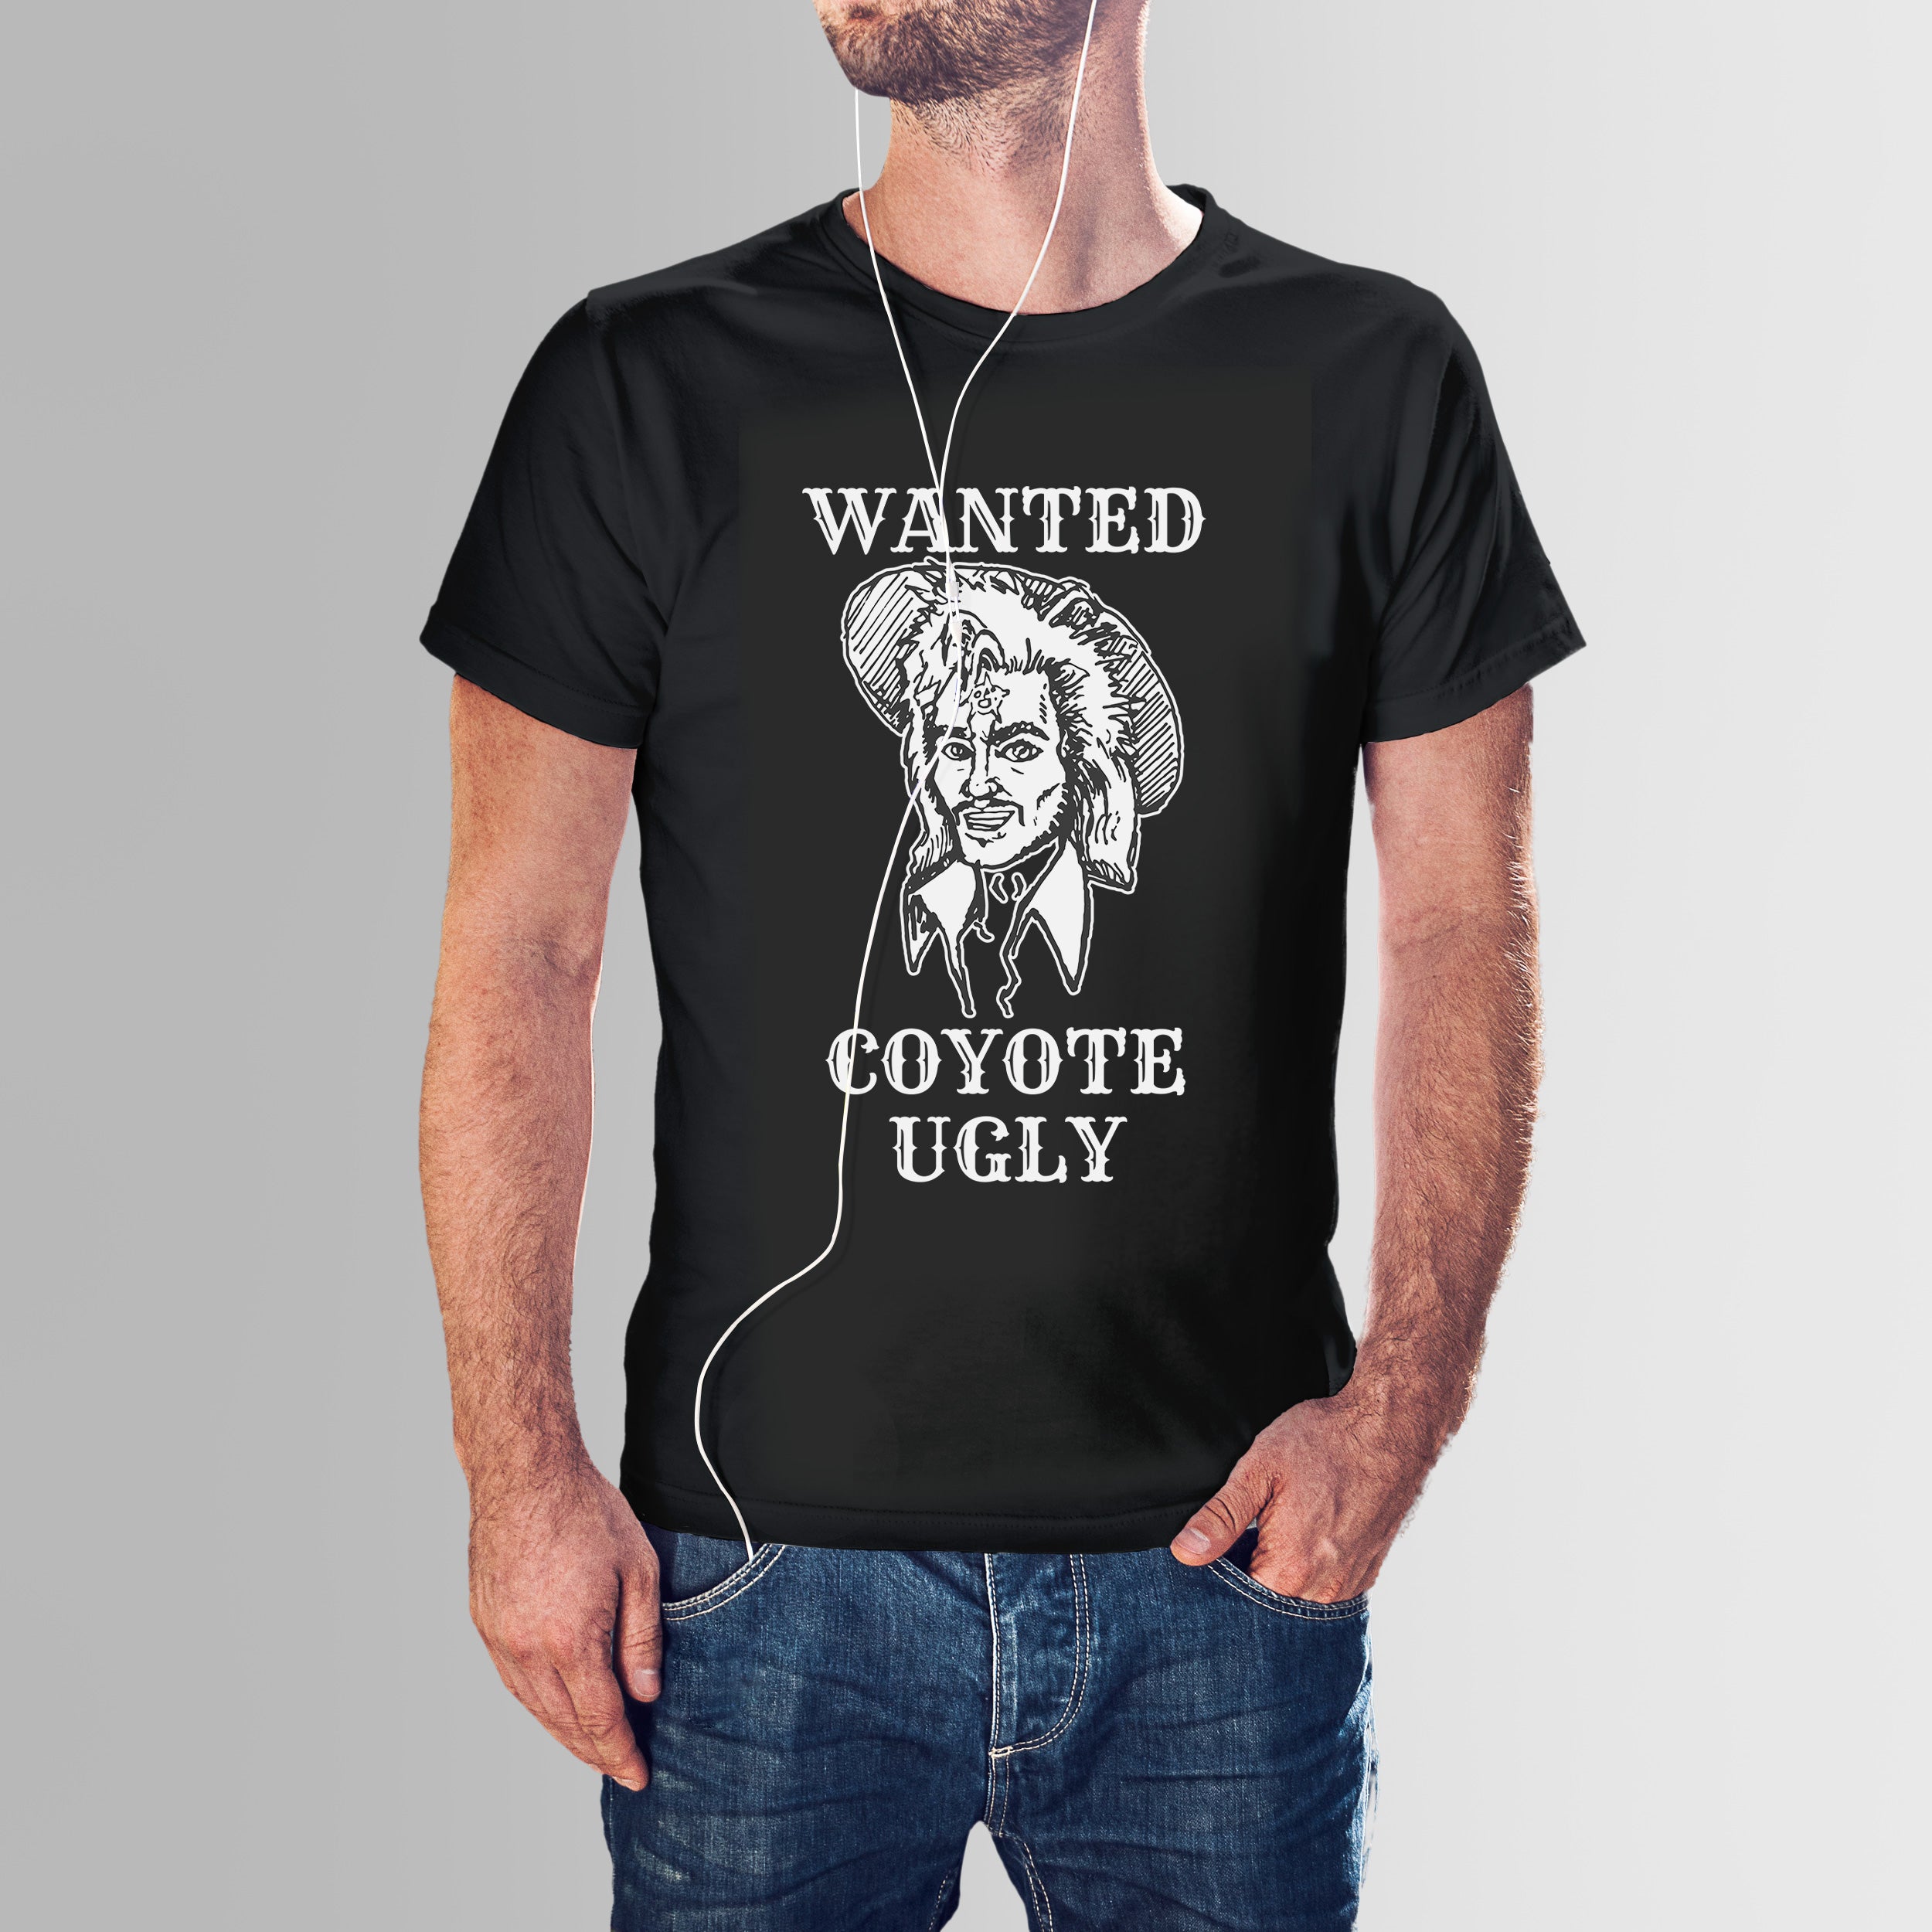 Coyote Ugly - Wanted Shirt